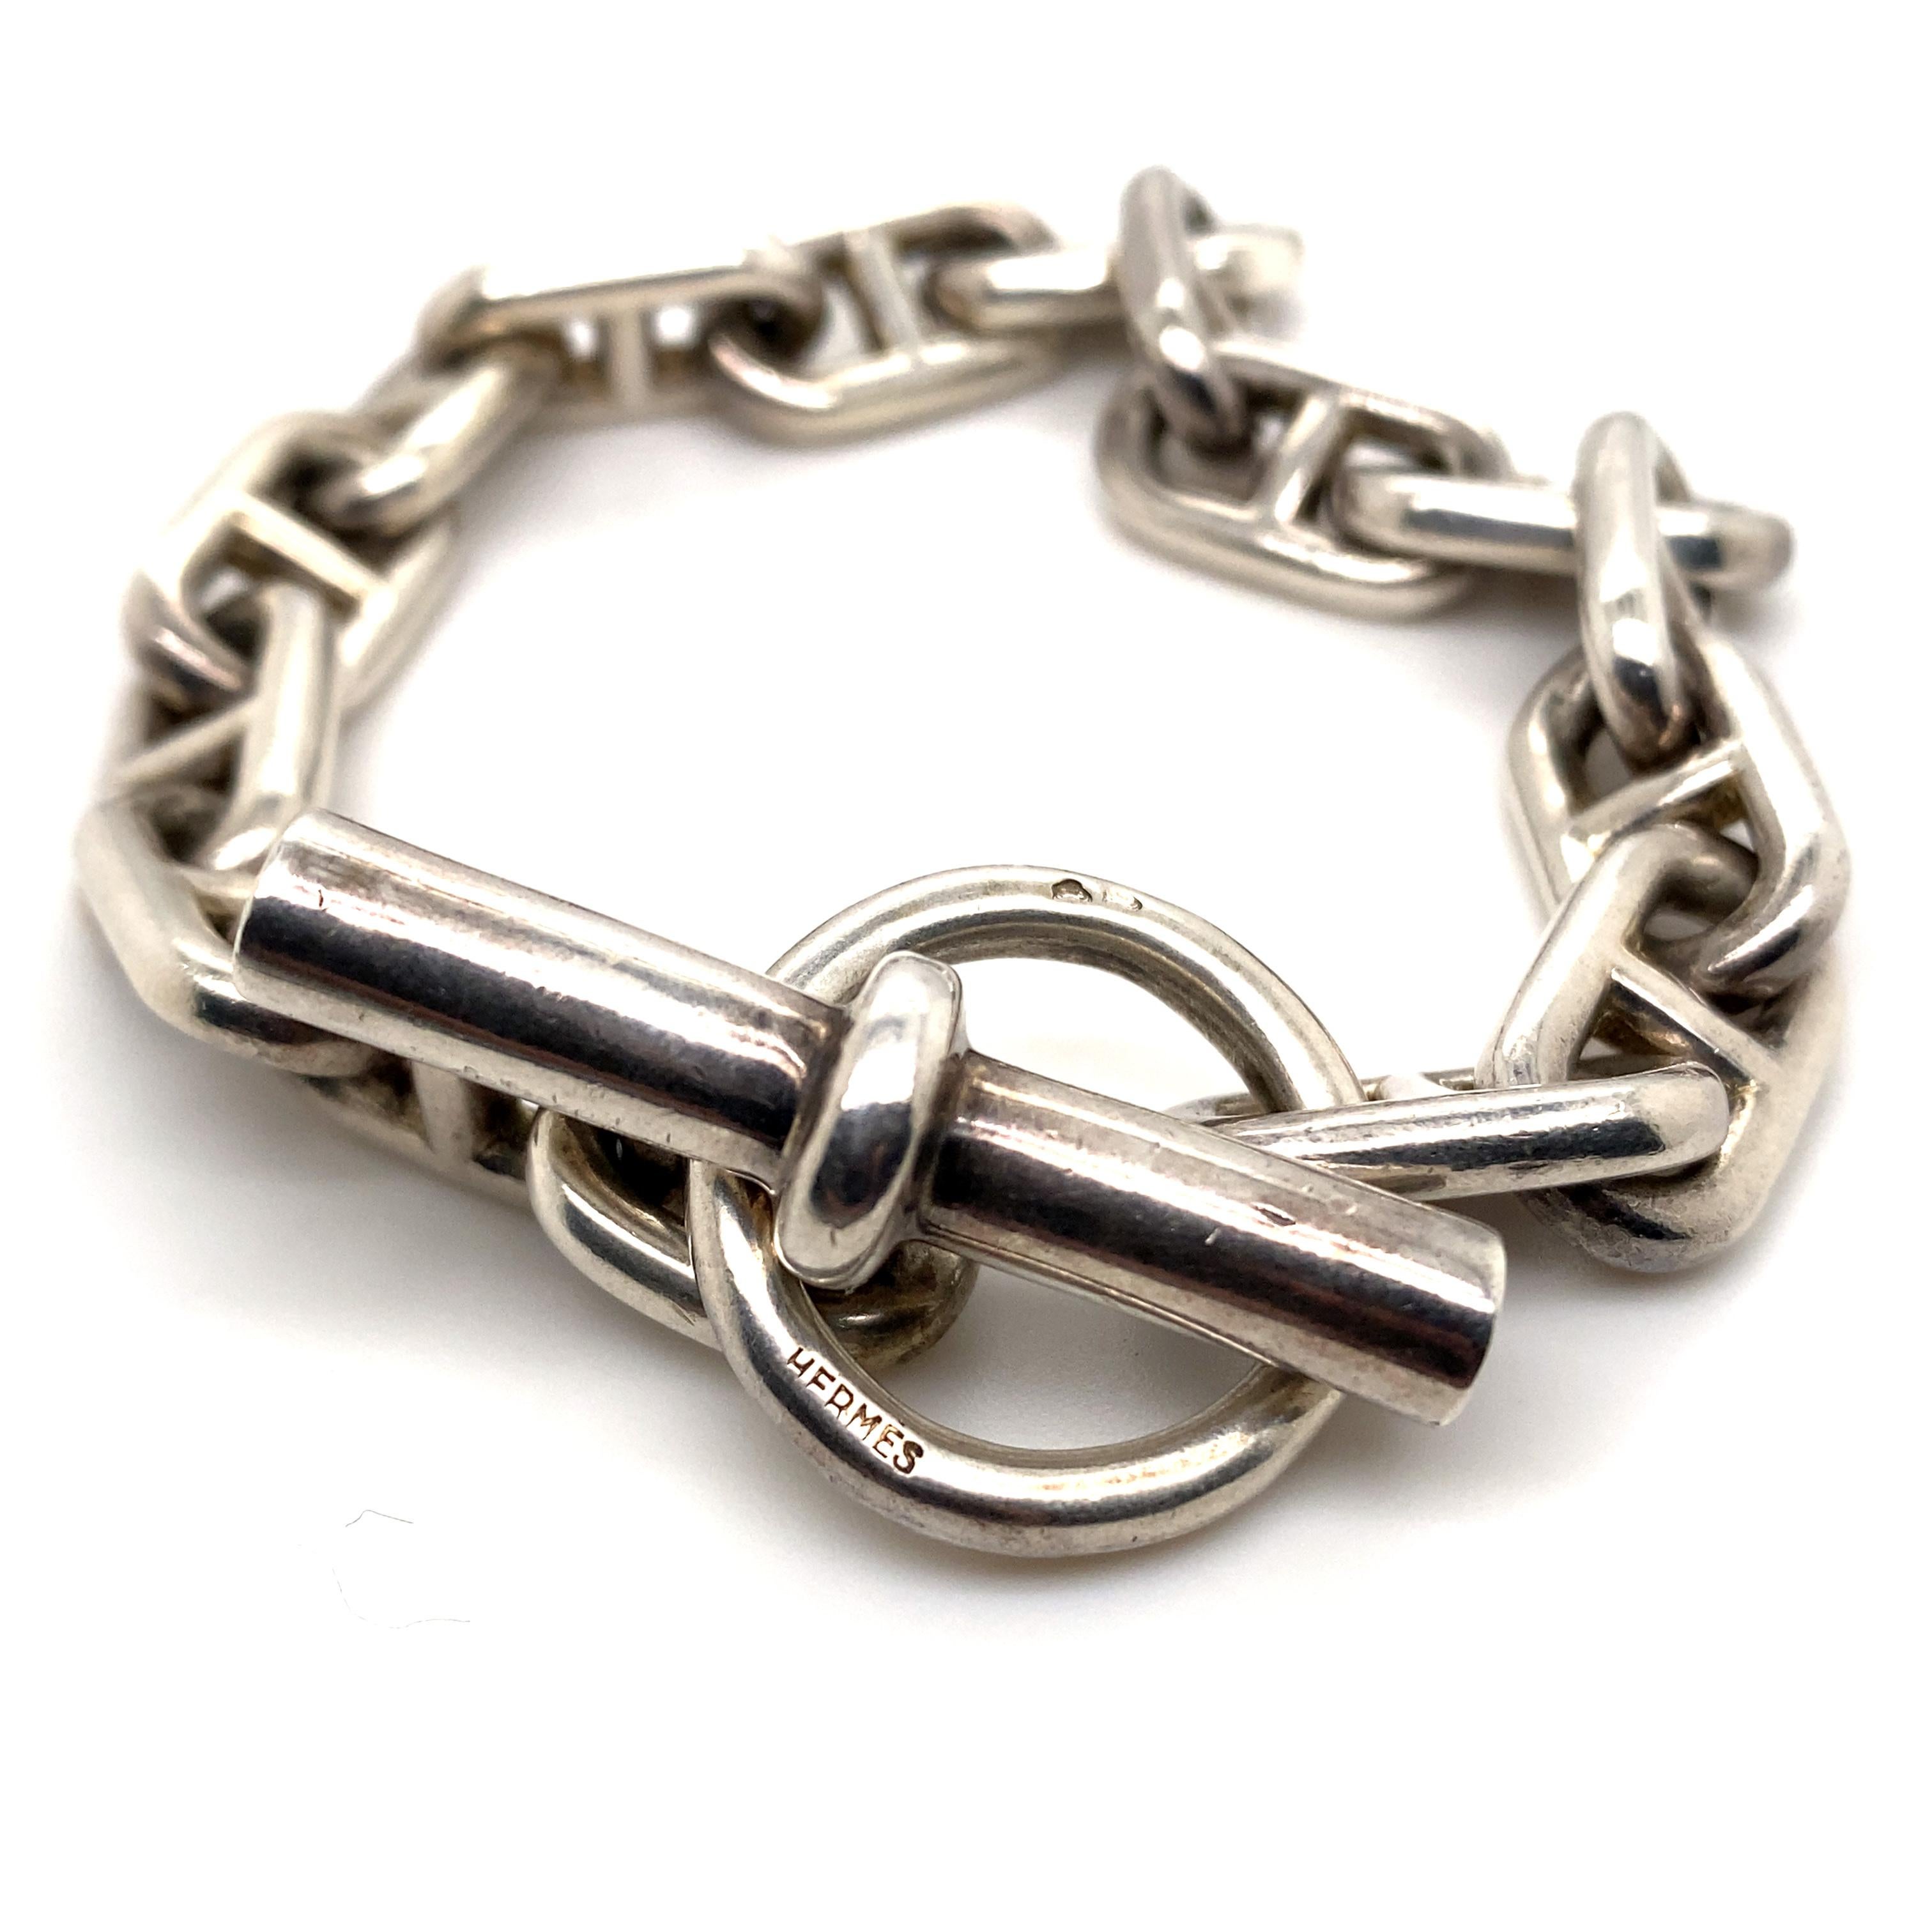 An Hermès Chaîne d'Ancre silver bracelet circa 1950.

This iconic Hermès bracelet is composed of silver oval links each with a bar spacer, to a circular or baton terminal, with a classic T-bar fitting. 
Signed HERMES to the larger circular